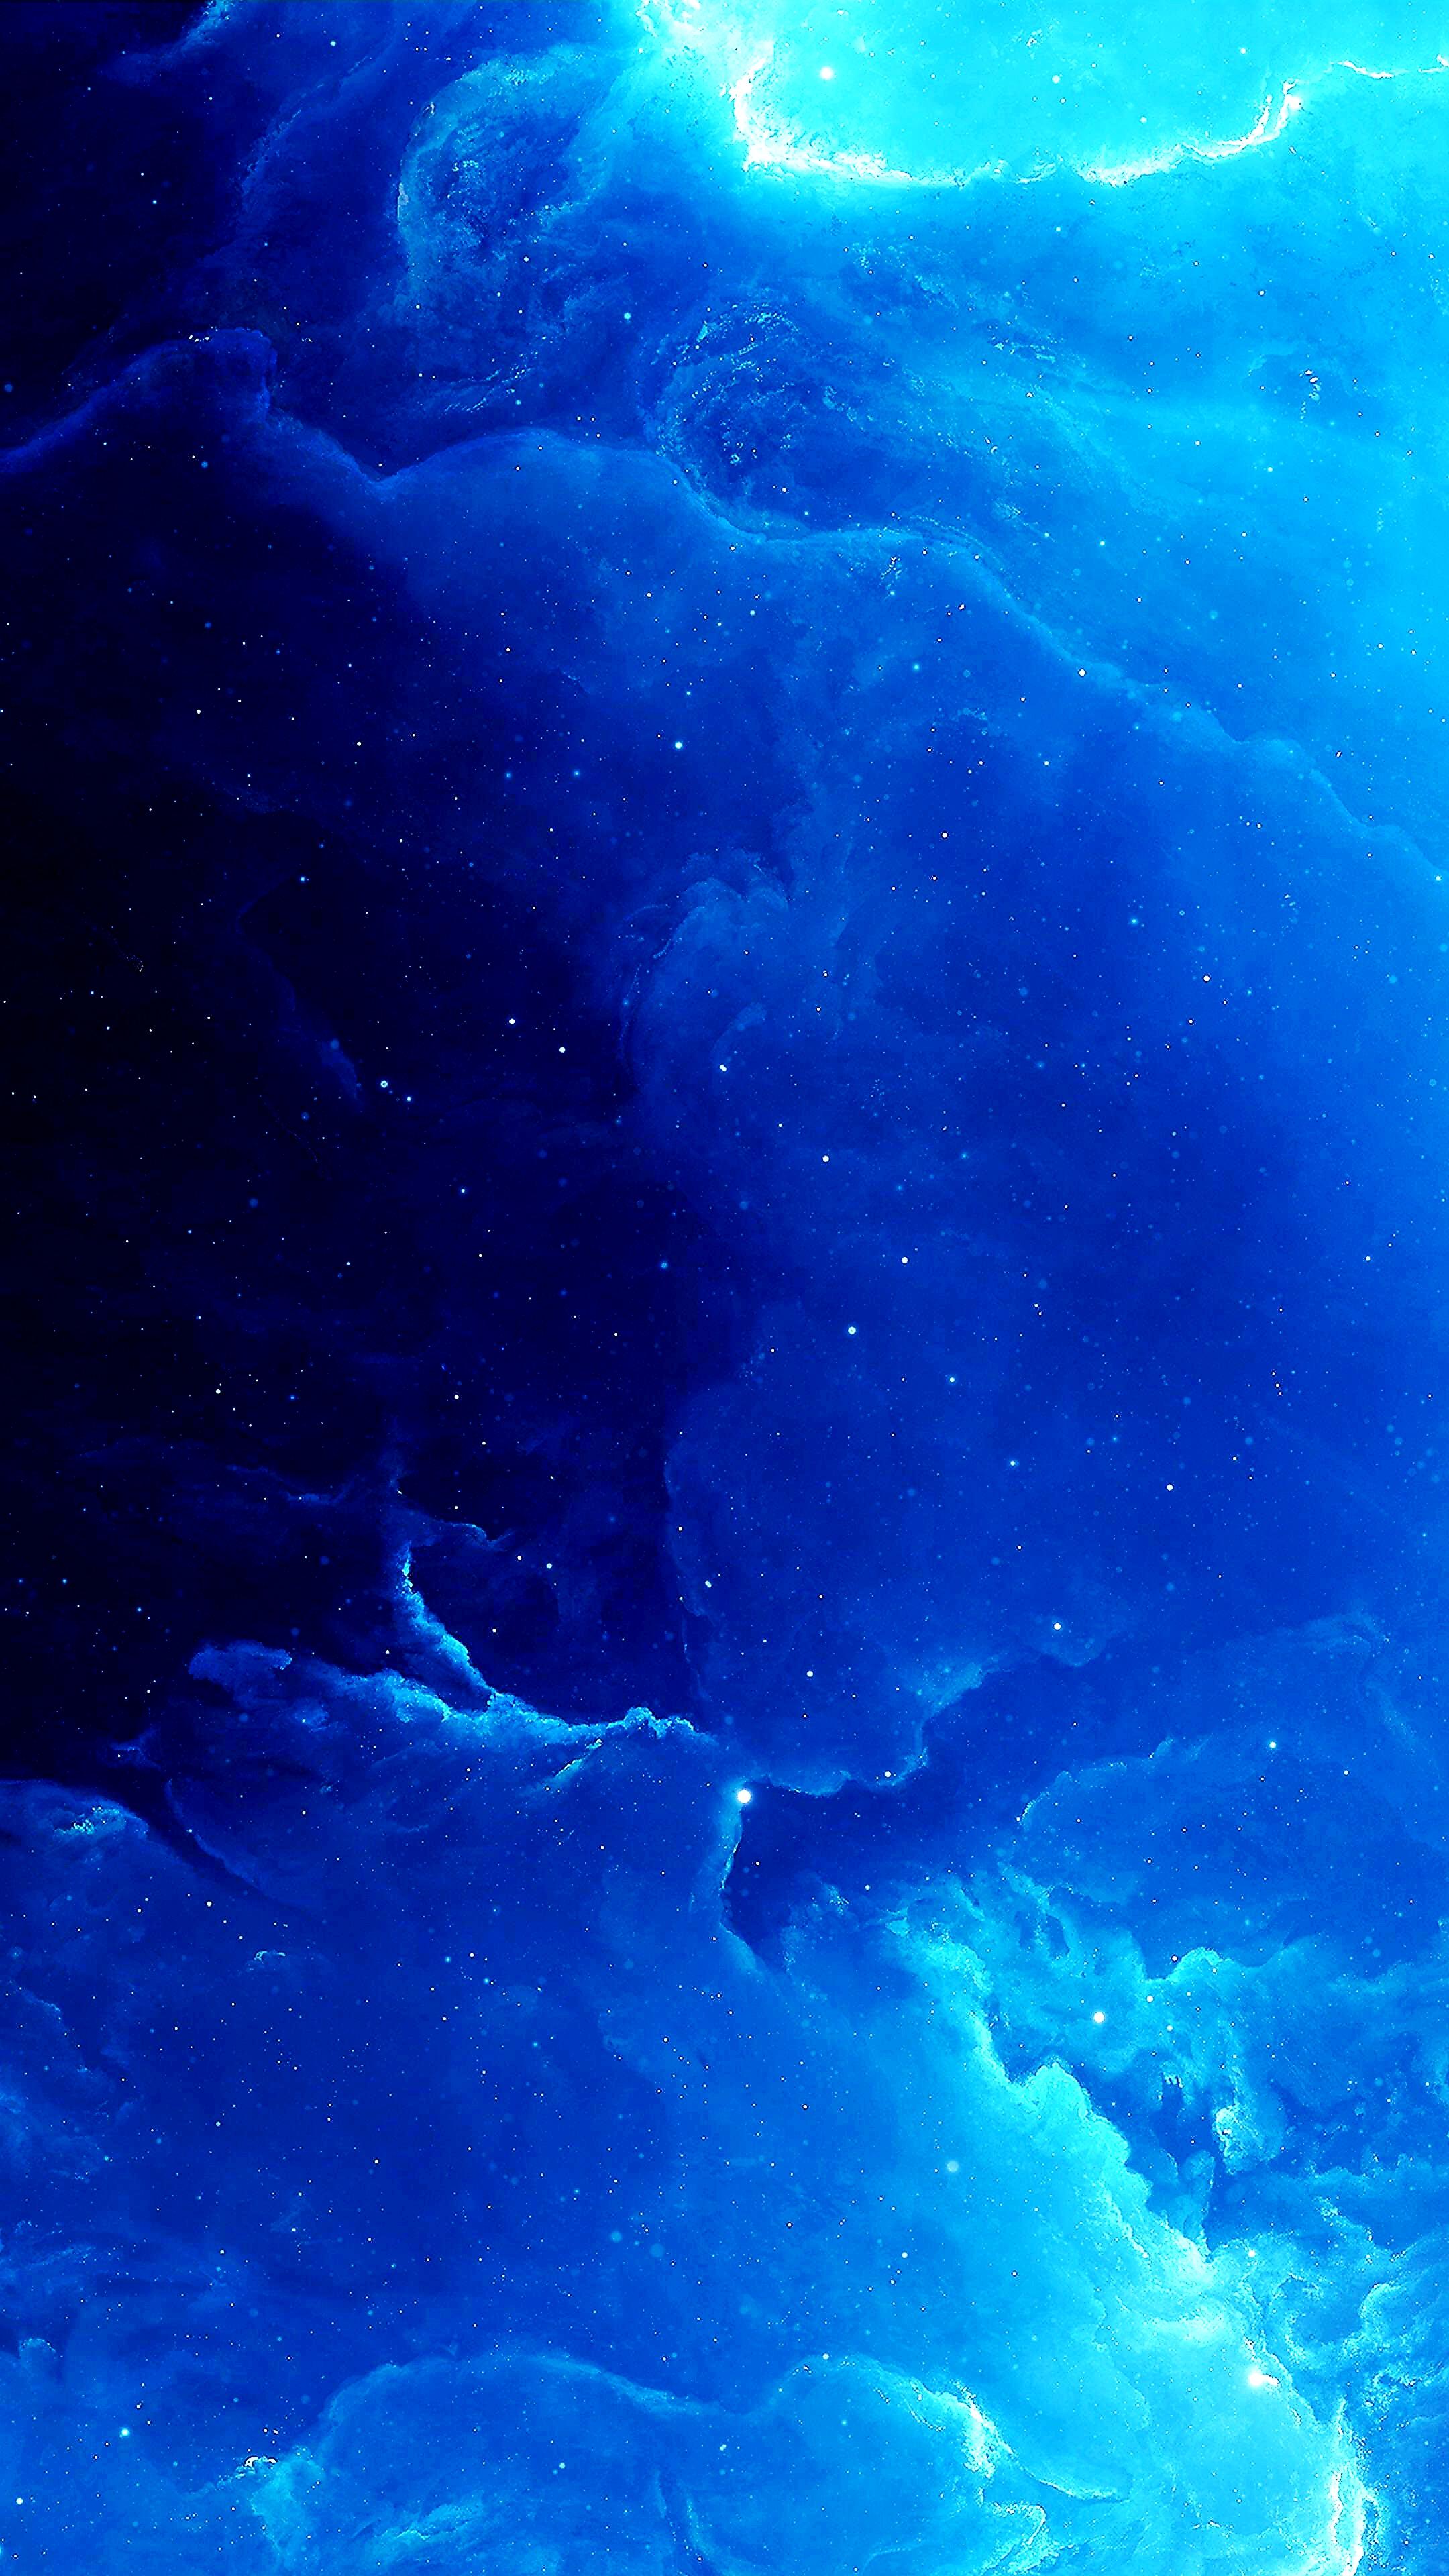 Saturated edit of one of my favorite space wallpaper